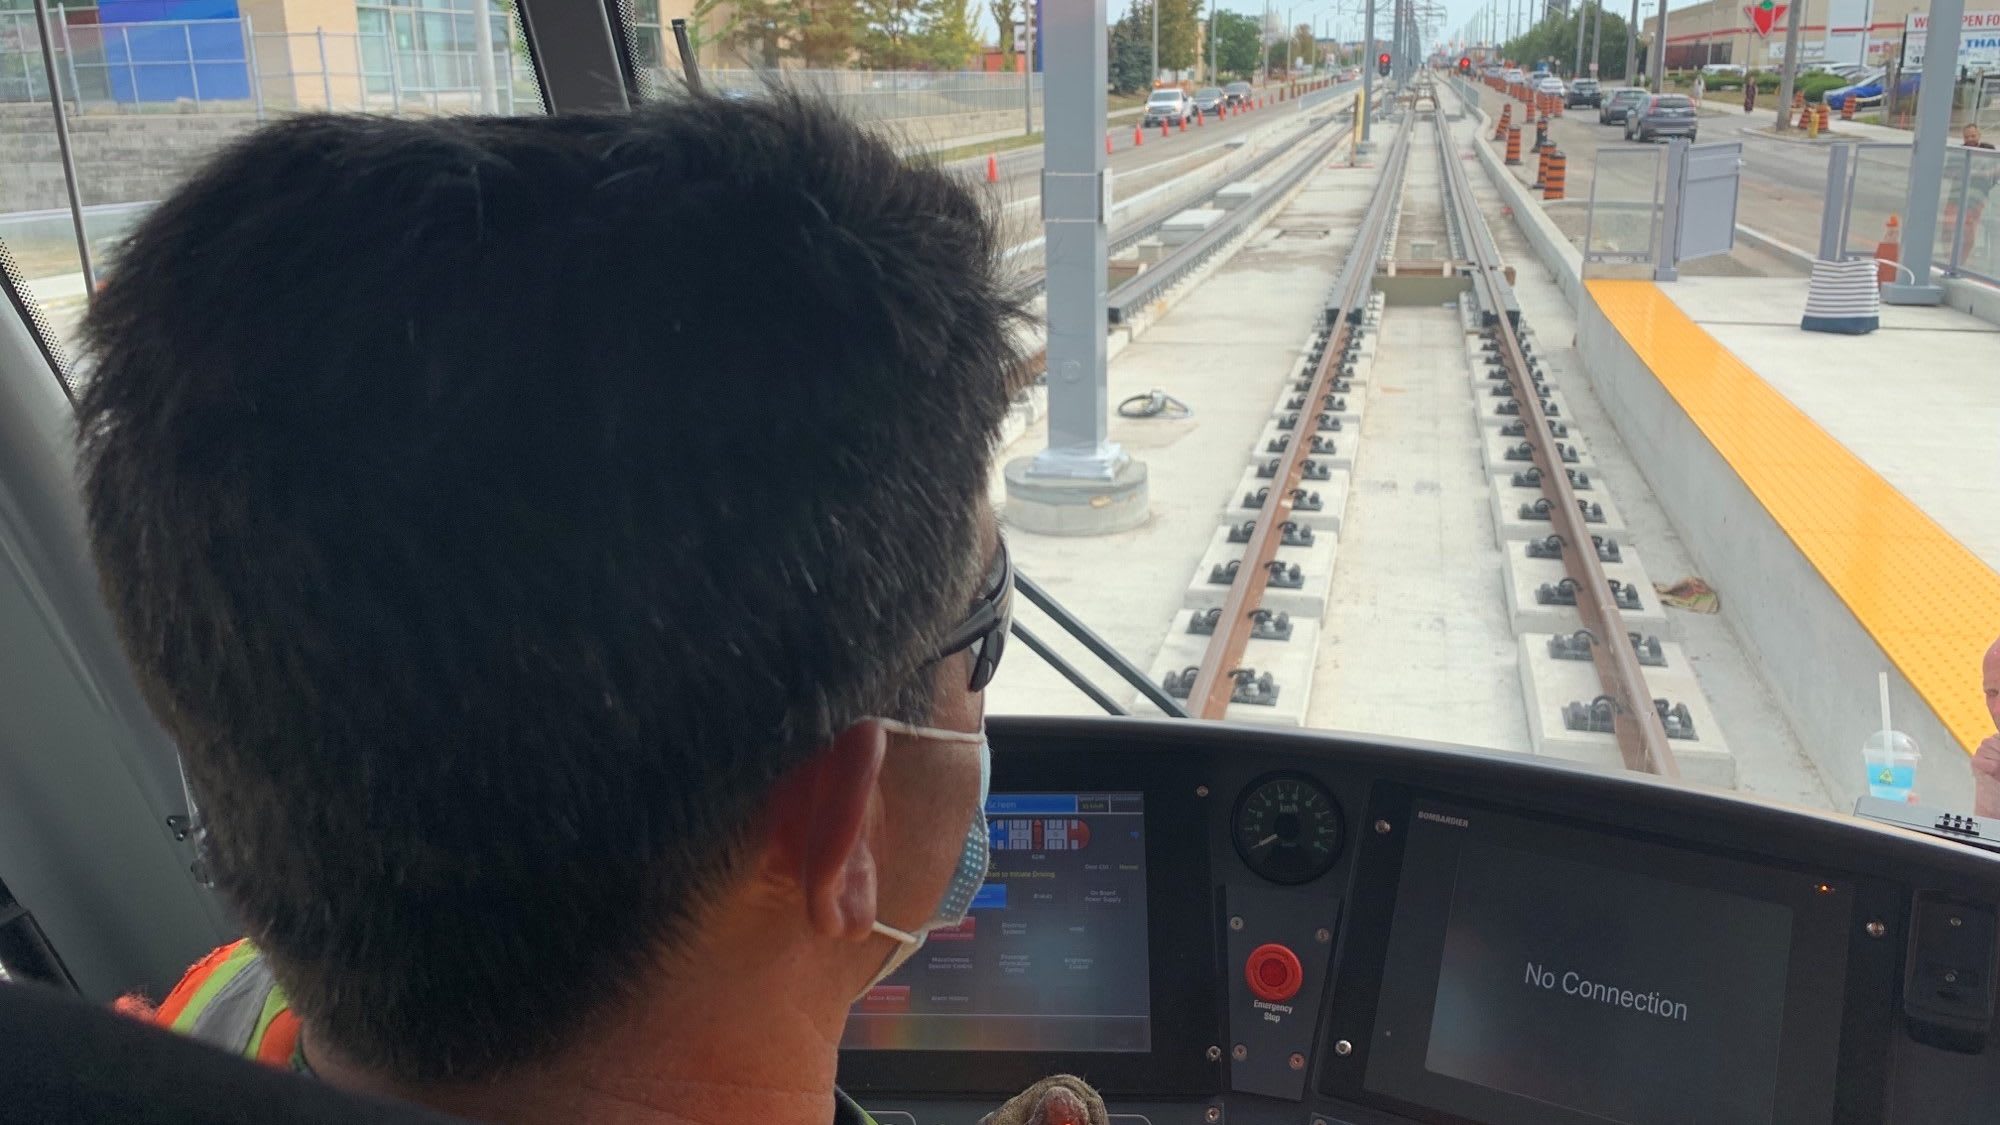 A look from the operator's perspective as the Crosstown vehicle tests get underway